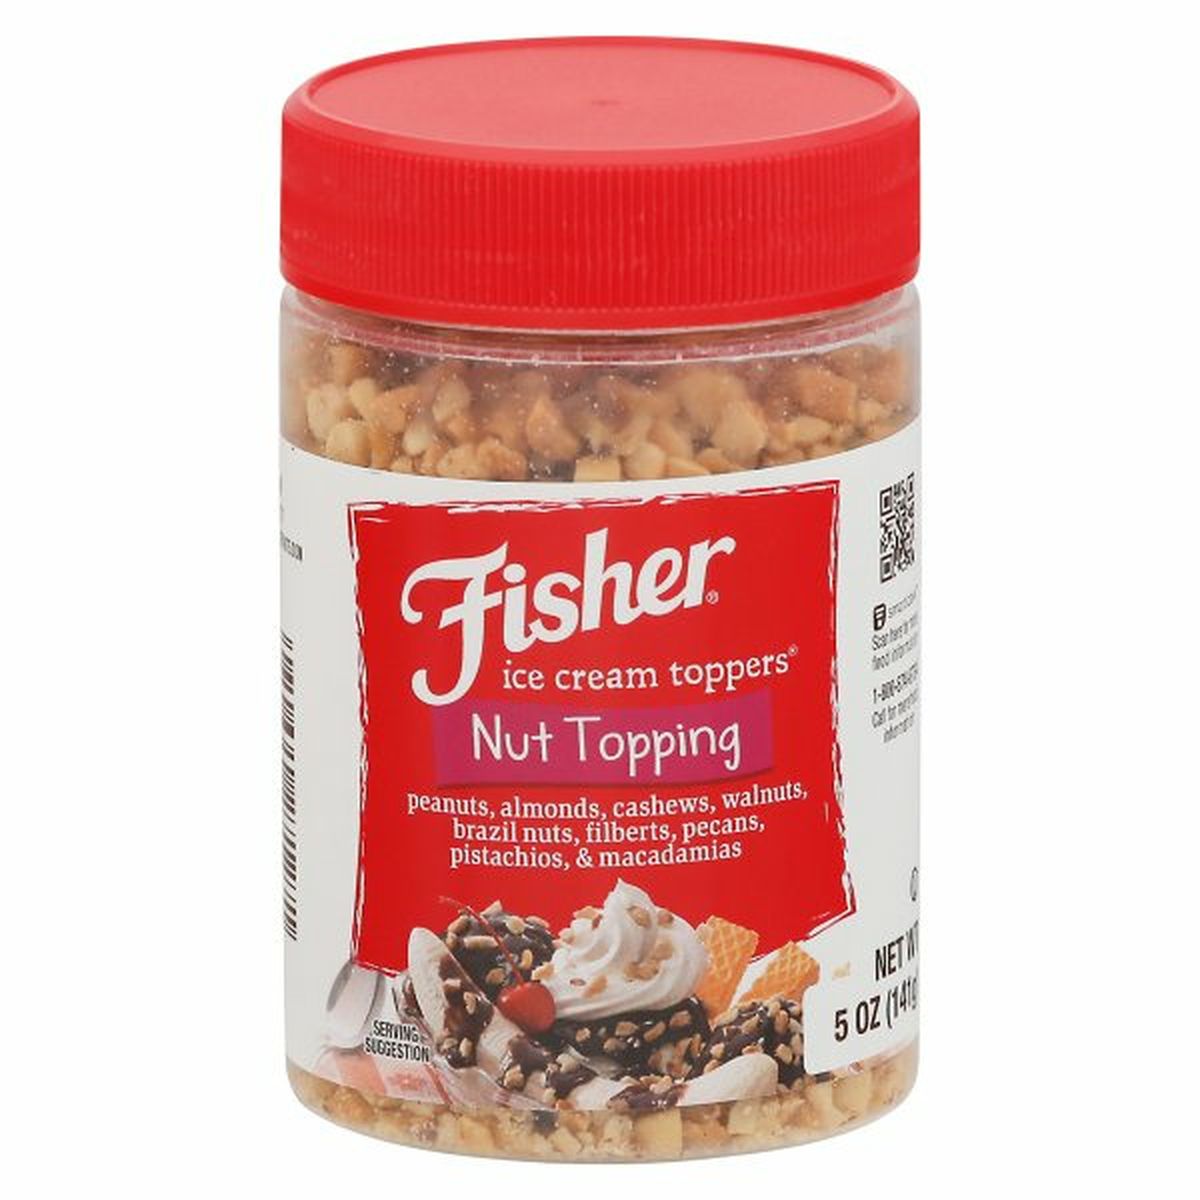 Calories in Fisher Ice Cream Toppers, Nut Topping